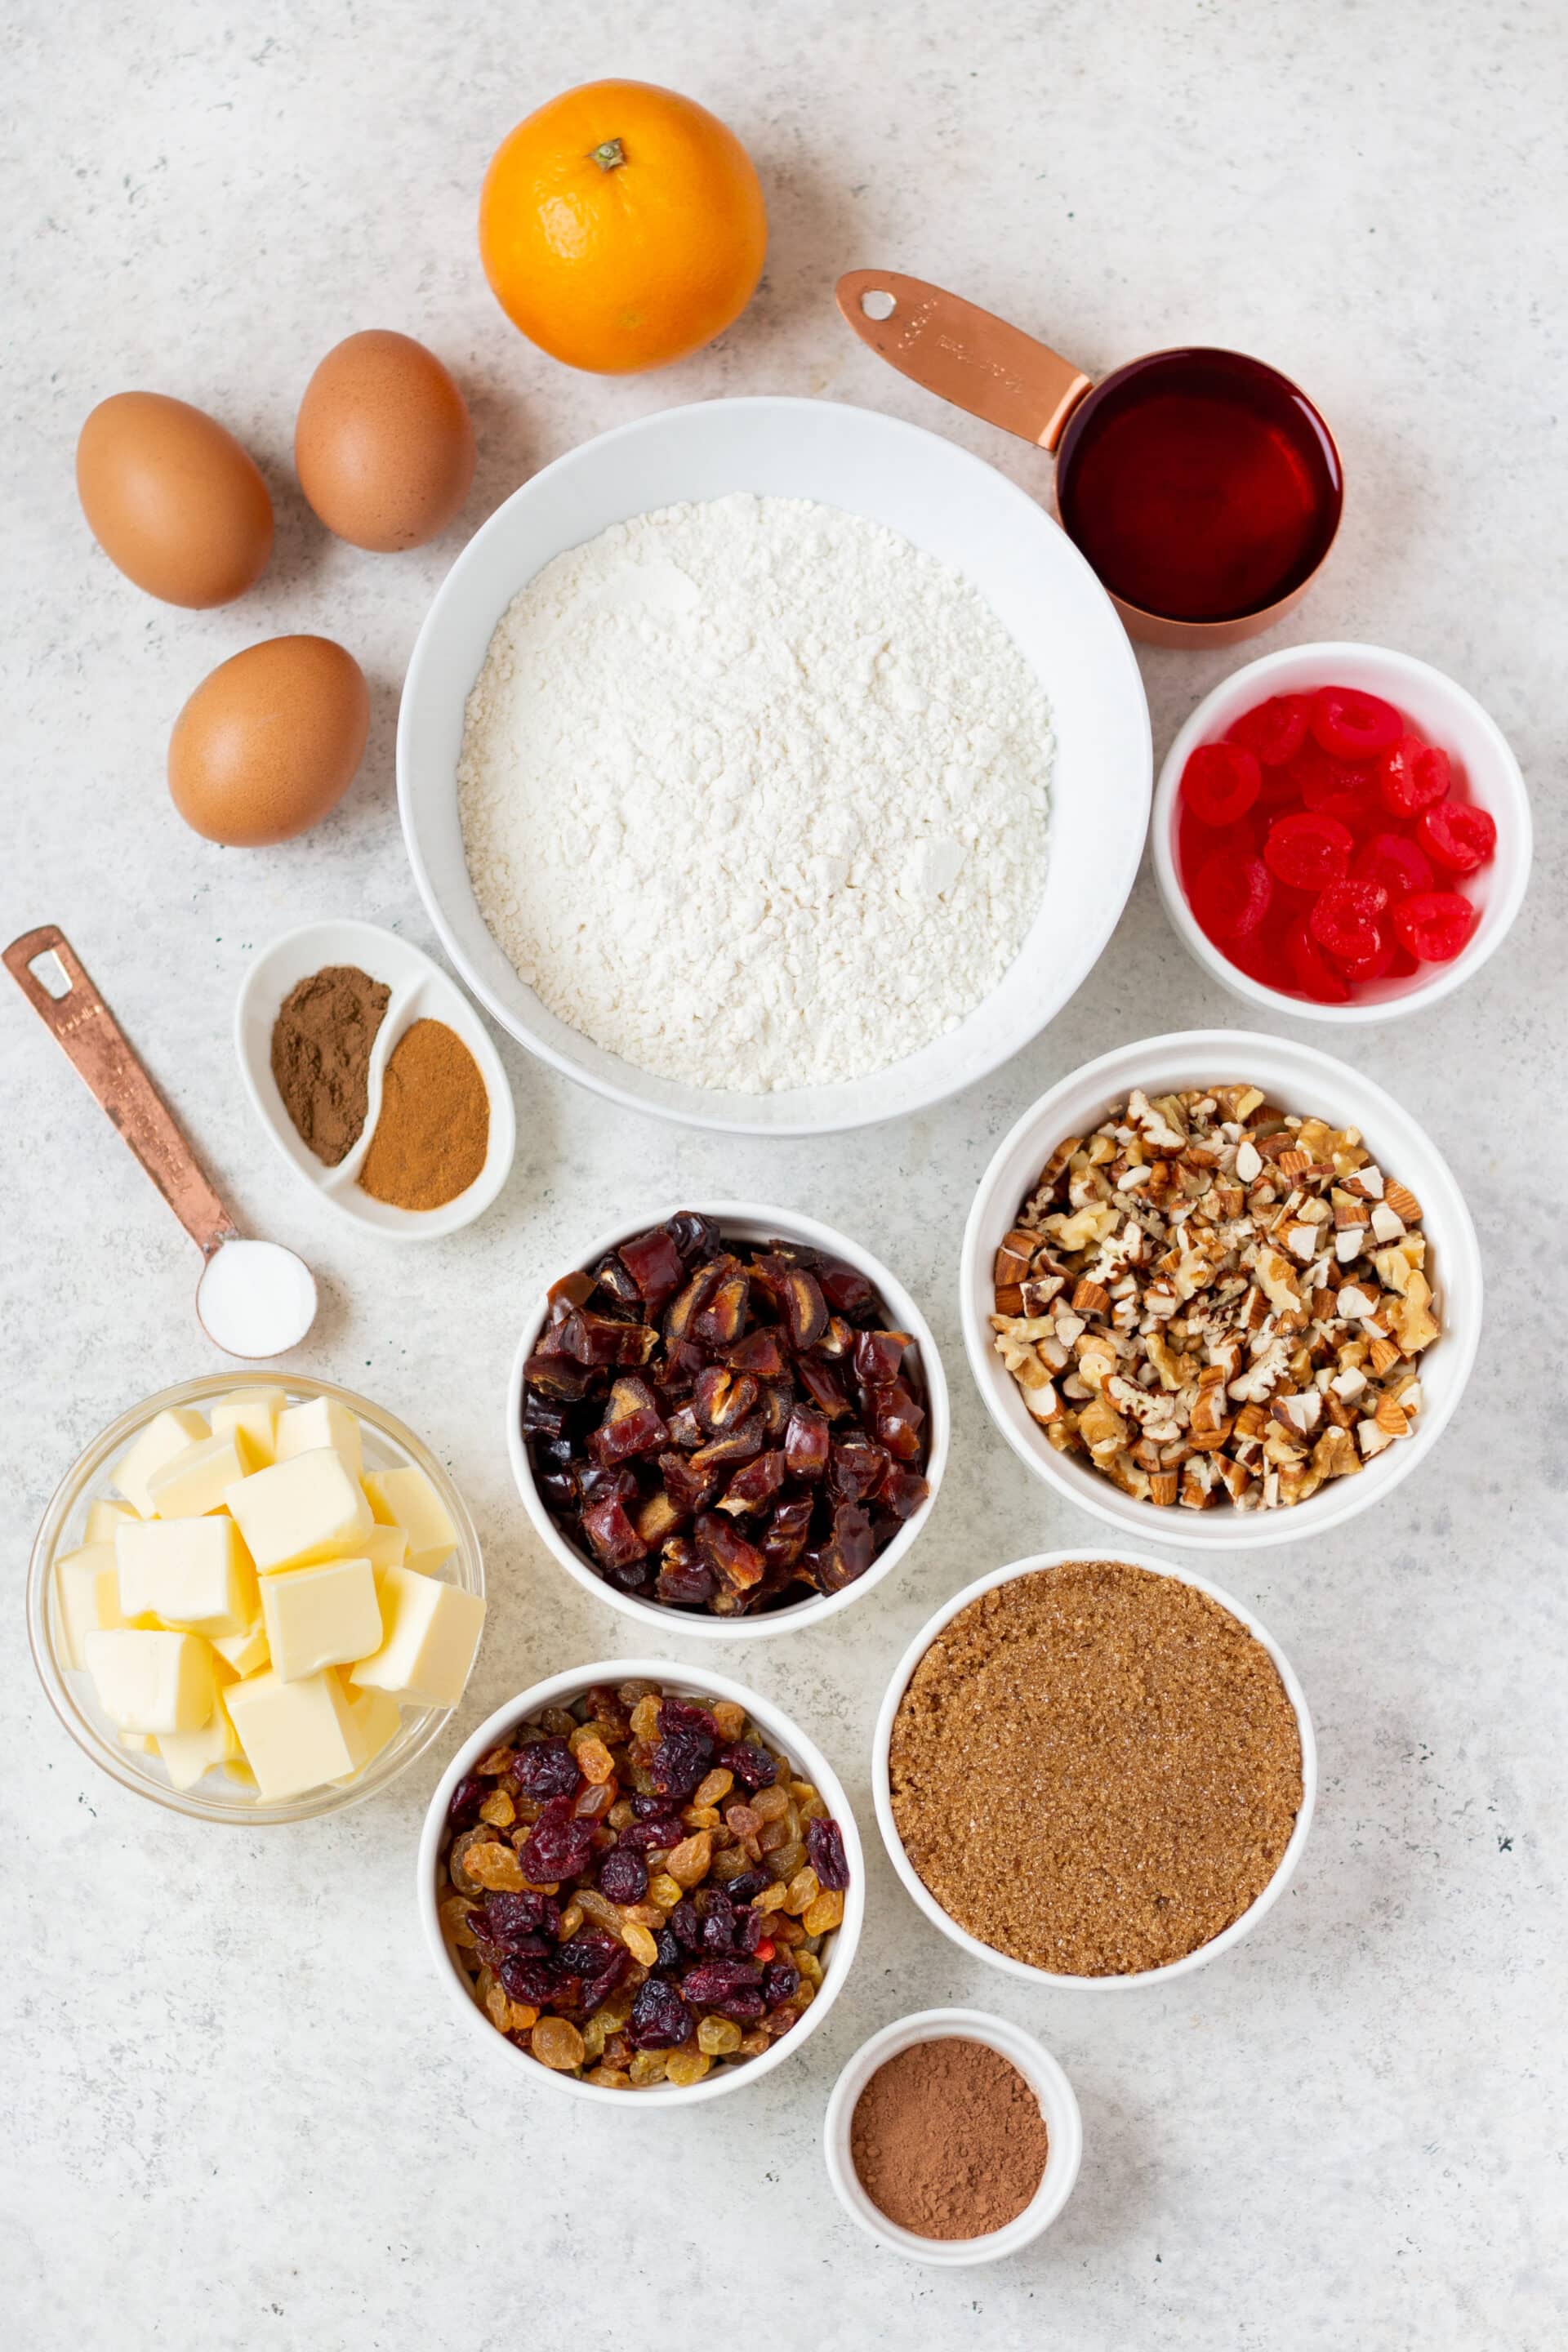 All of the ingredients for gluten free fruitcake, in separate bowls, on a counter, viewed from overhead